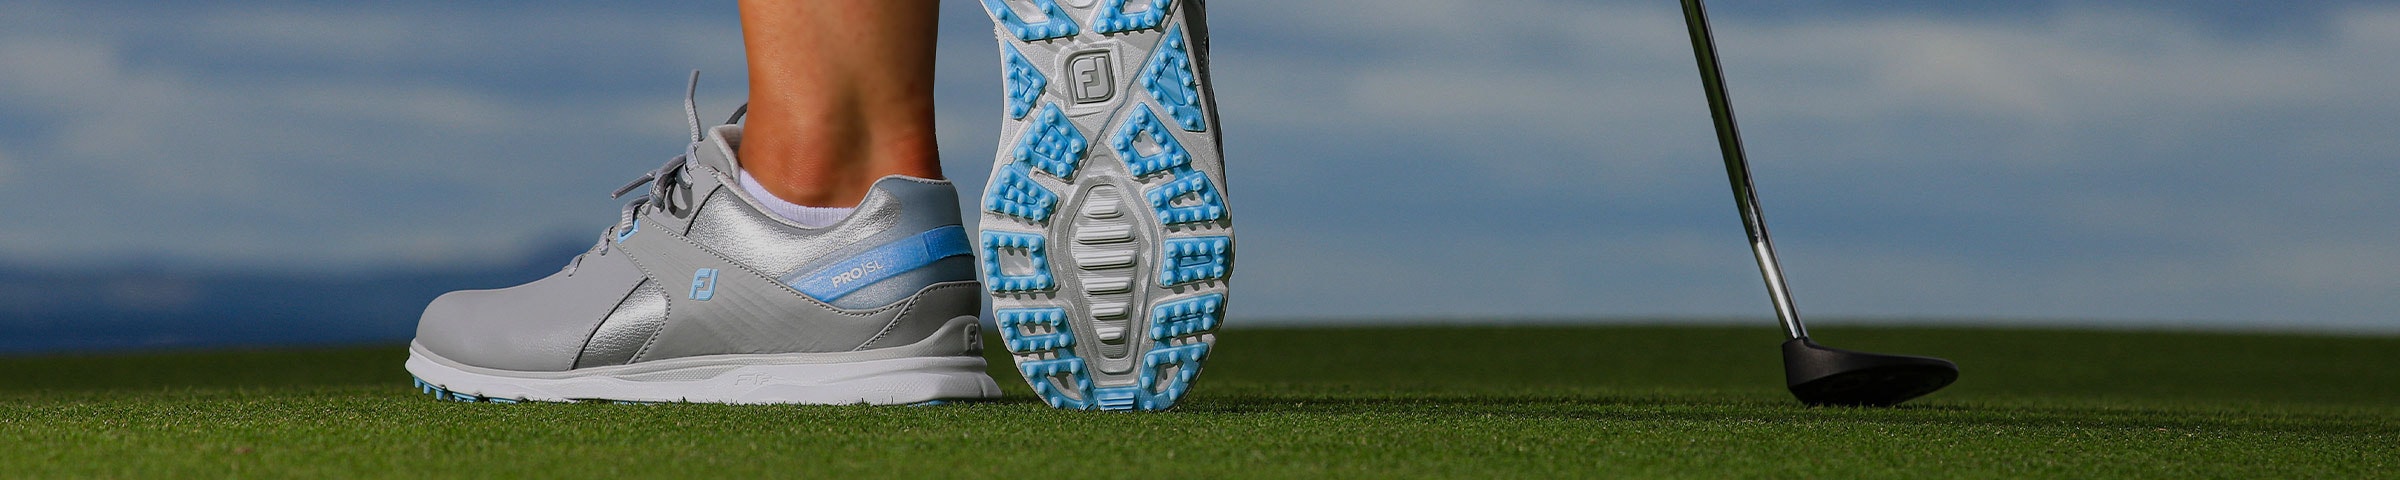 Women's Golf Shoes | The #1 Shoe in 